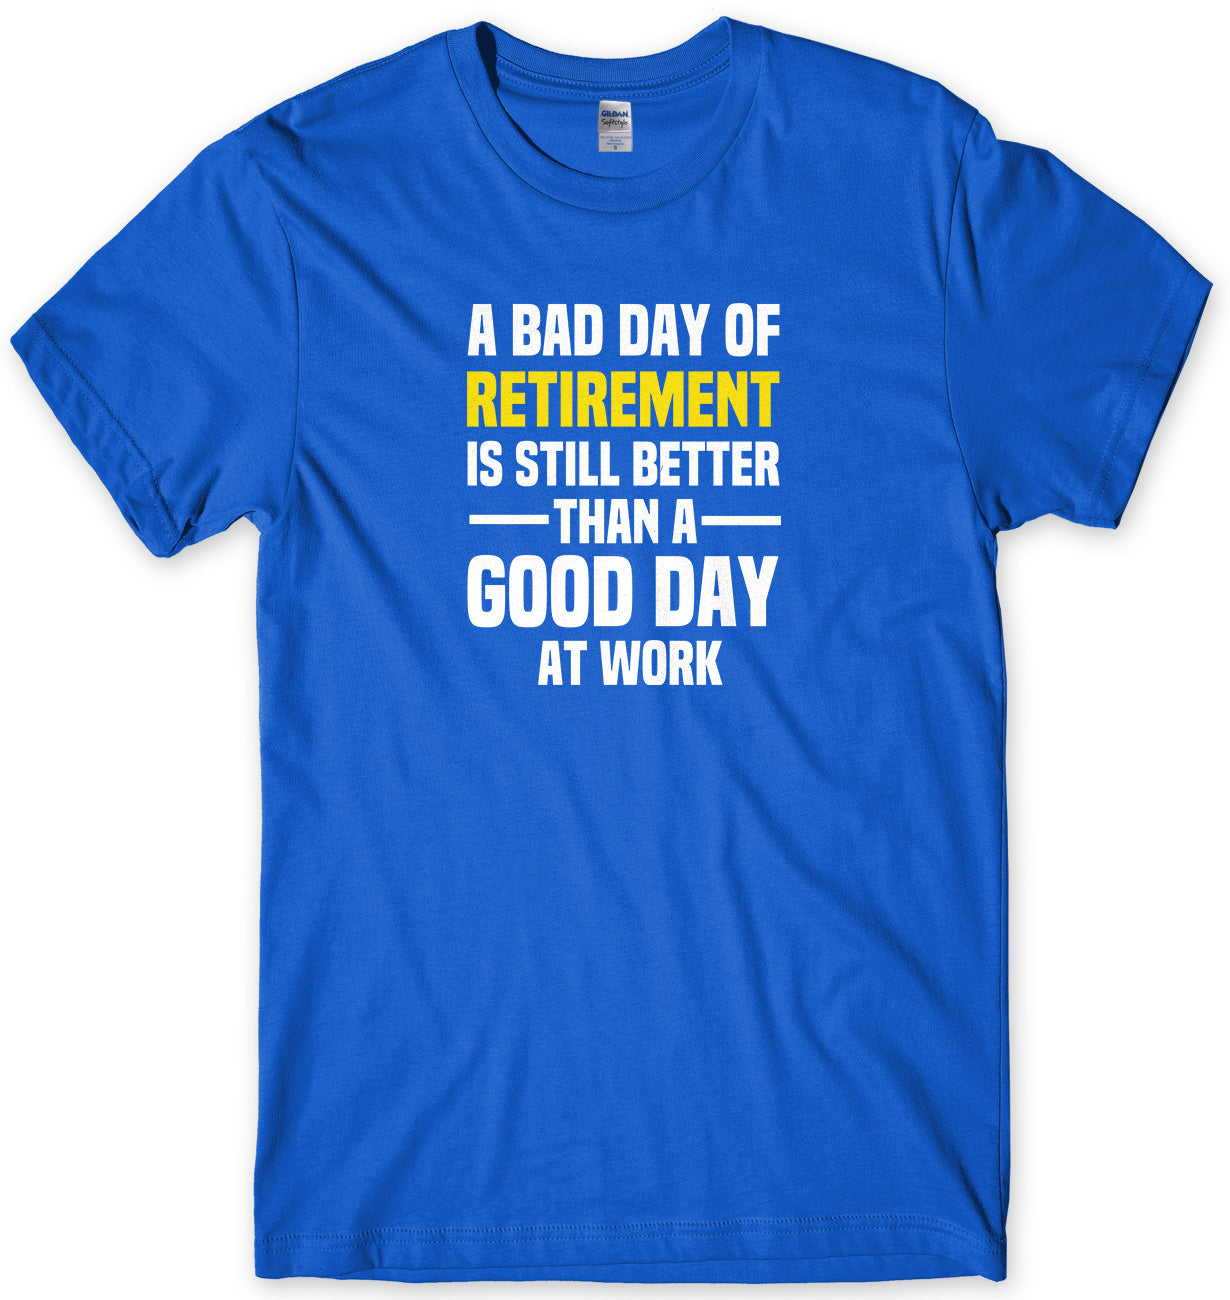 A BAD DAY OF RETIREMENT IS STILL BETTER THAN A GOOD DAY AT WORK MENS FUNNY SLOGAN UNISEX T-SHIRT - StreetSide Surgeons